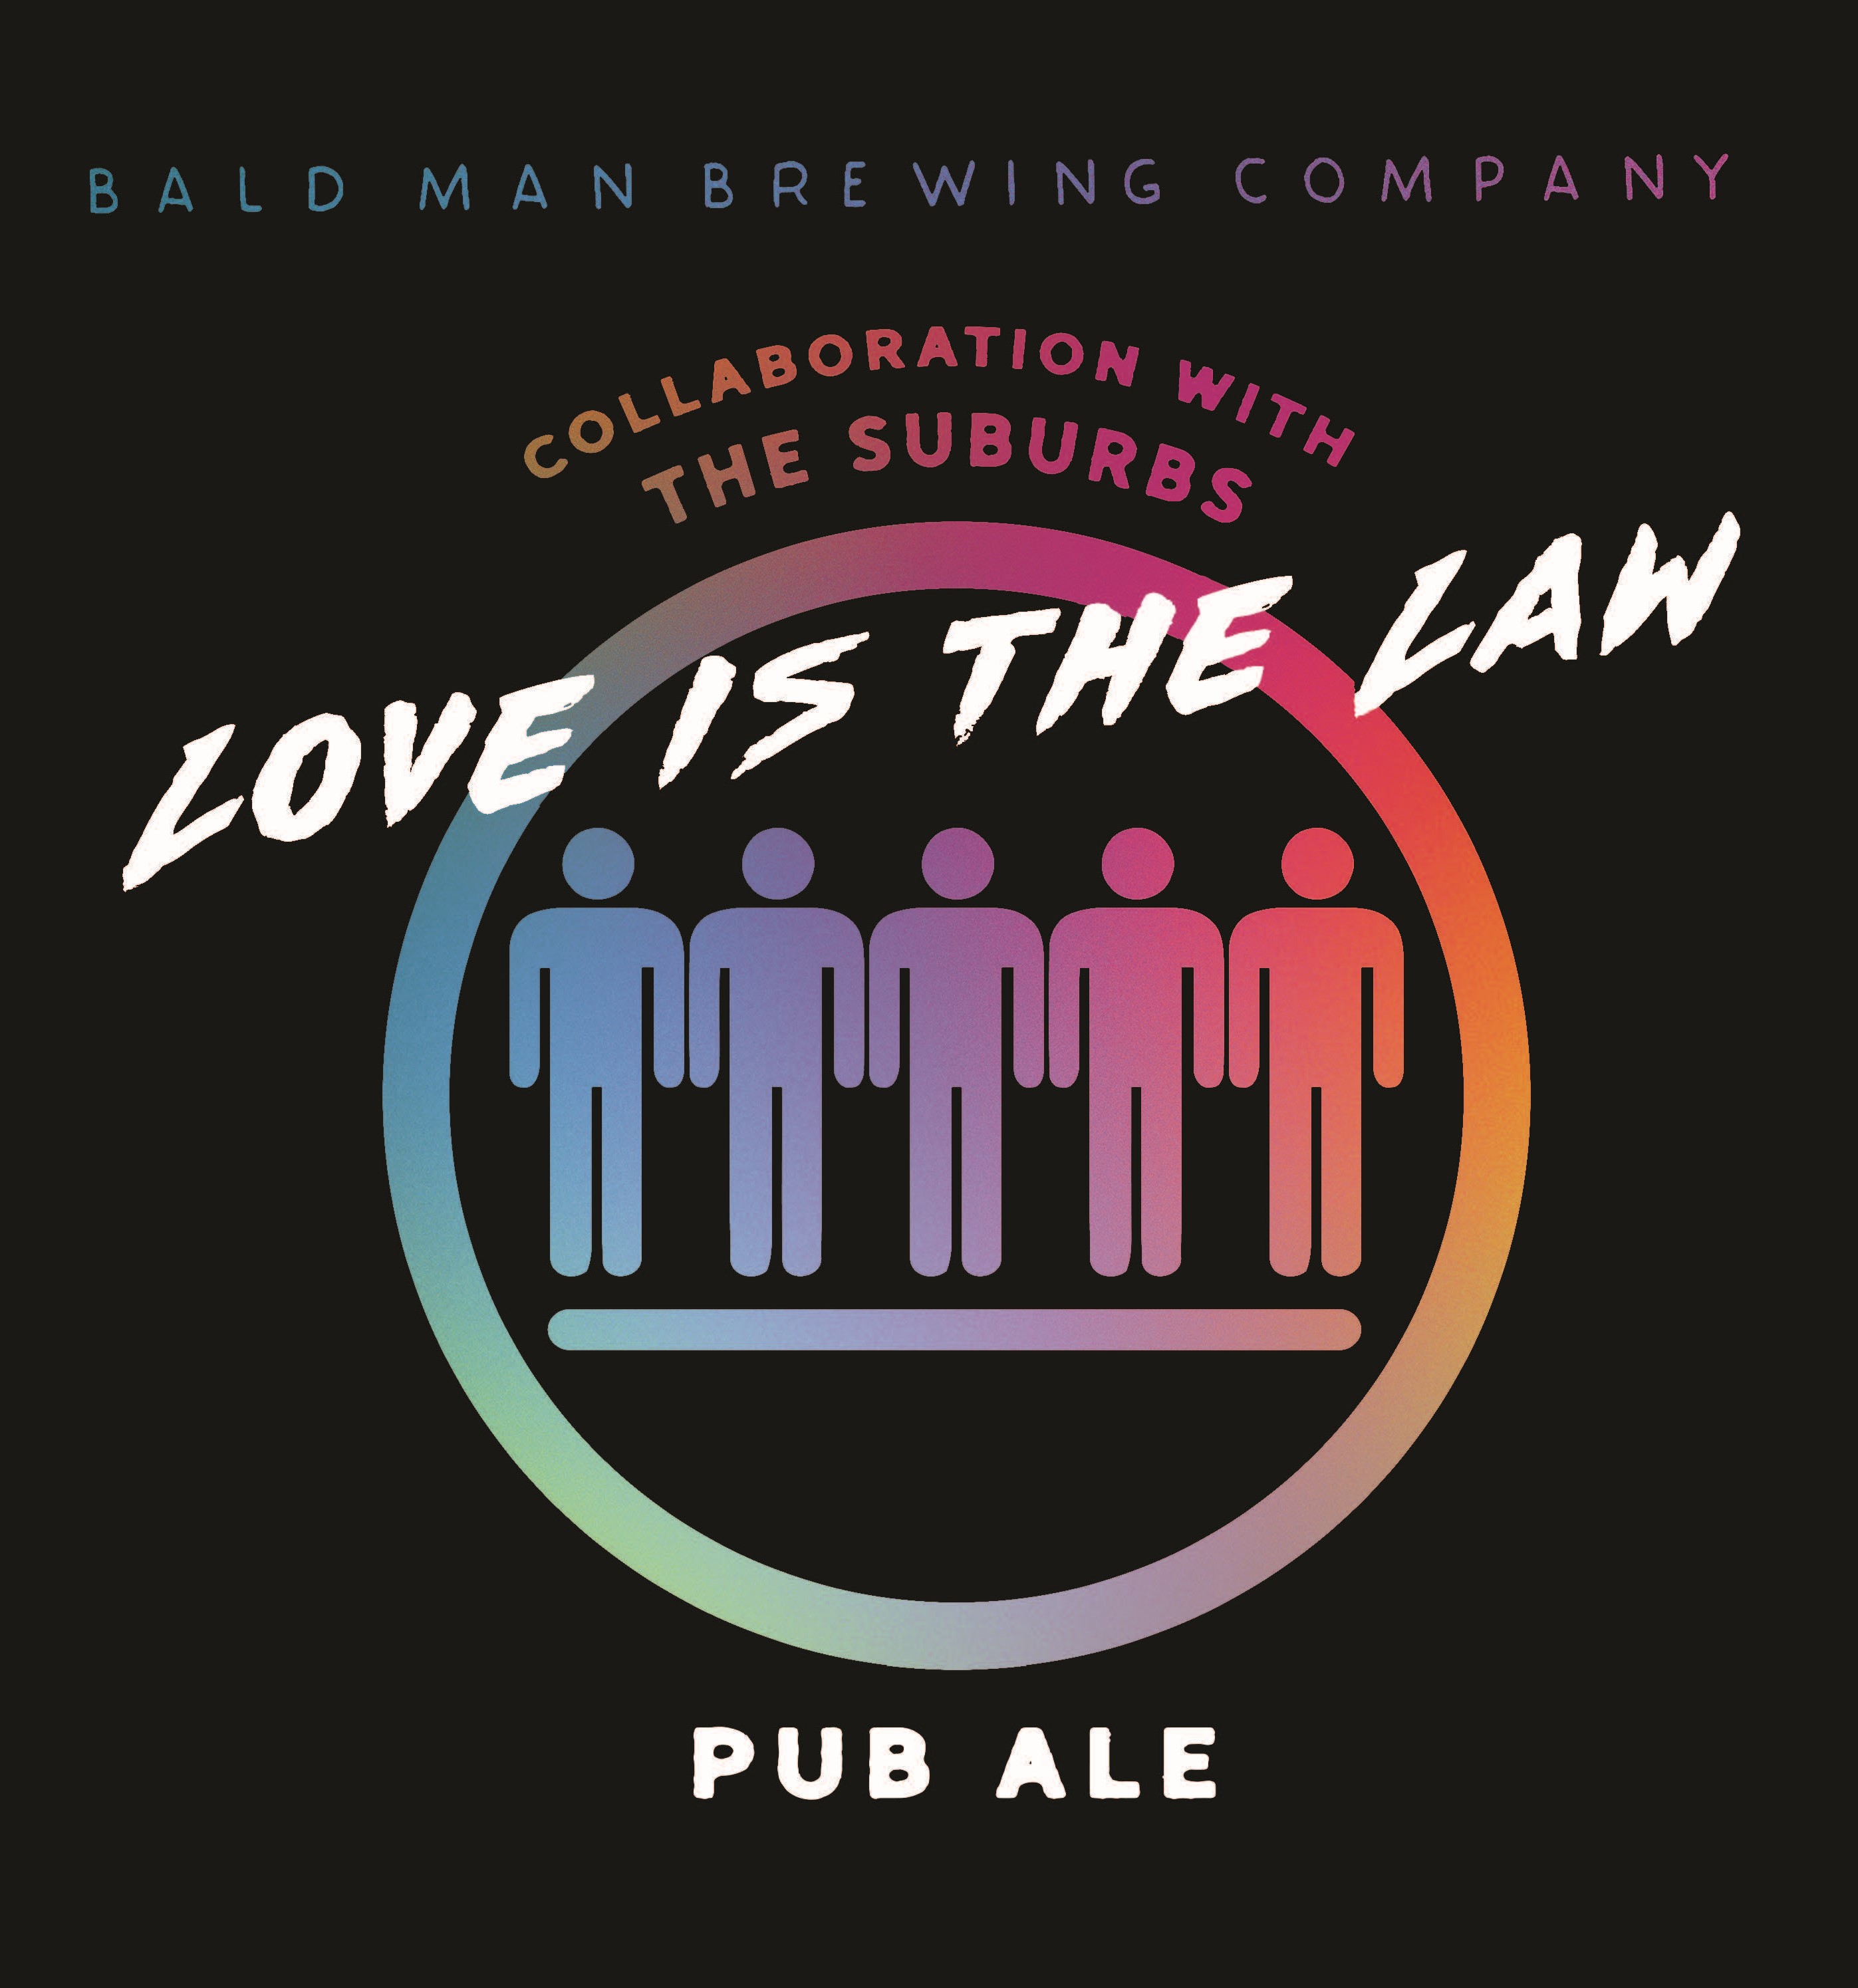 Bald Man Brewing to Release the Suburbs "Love is the Law Pub Ale" on 8/20 to Bring Everyone Together Over a Beer in the Name of Love and Rock & Roll